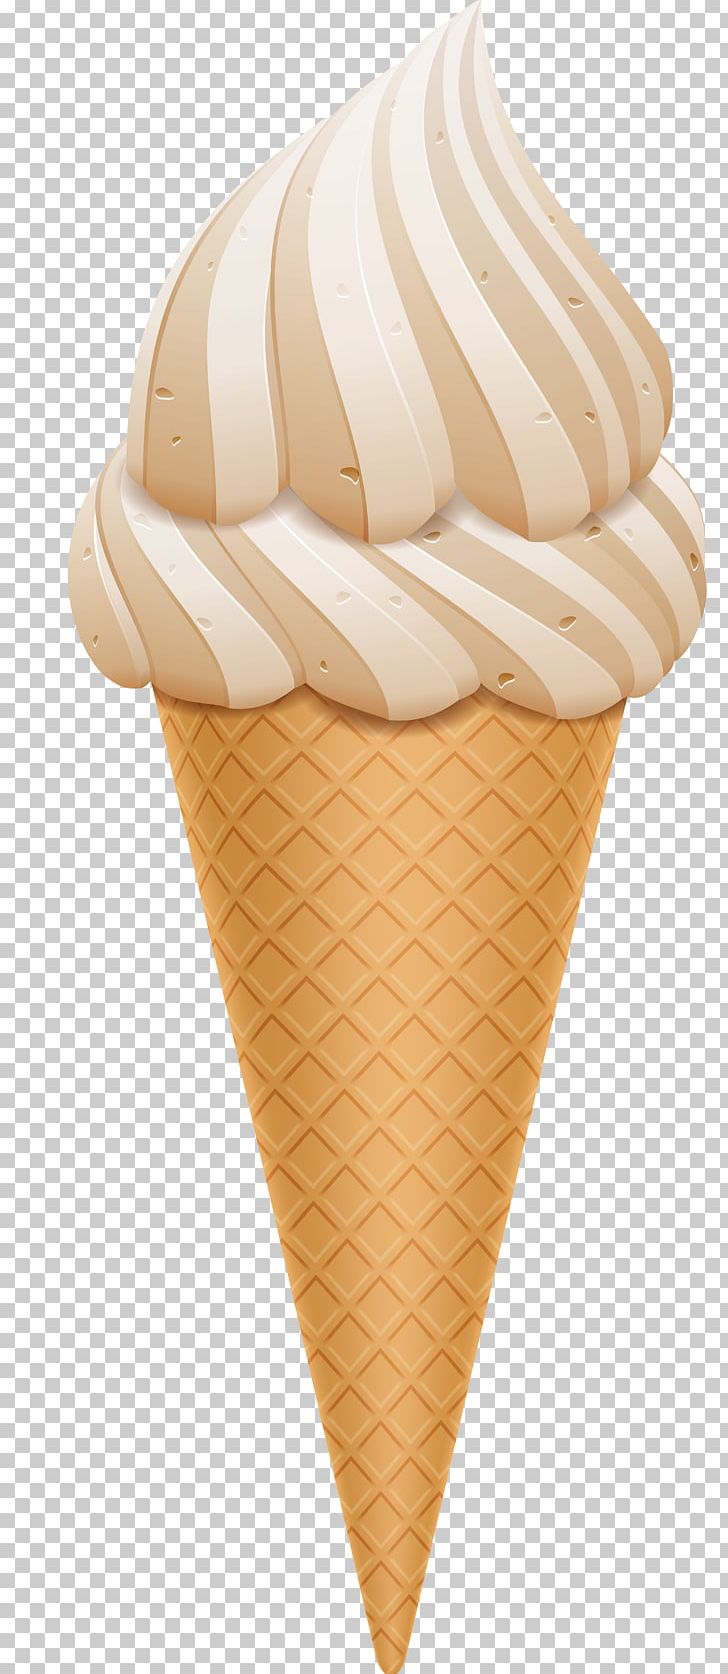 Ice Cream Cones Gelato Milk PNG, Clipart, Cream, Dairy Product, Dessert, Dondurma, Drawing Free PNG Download